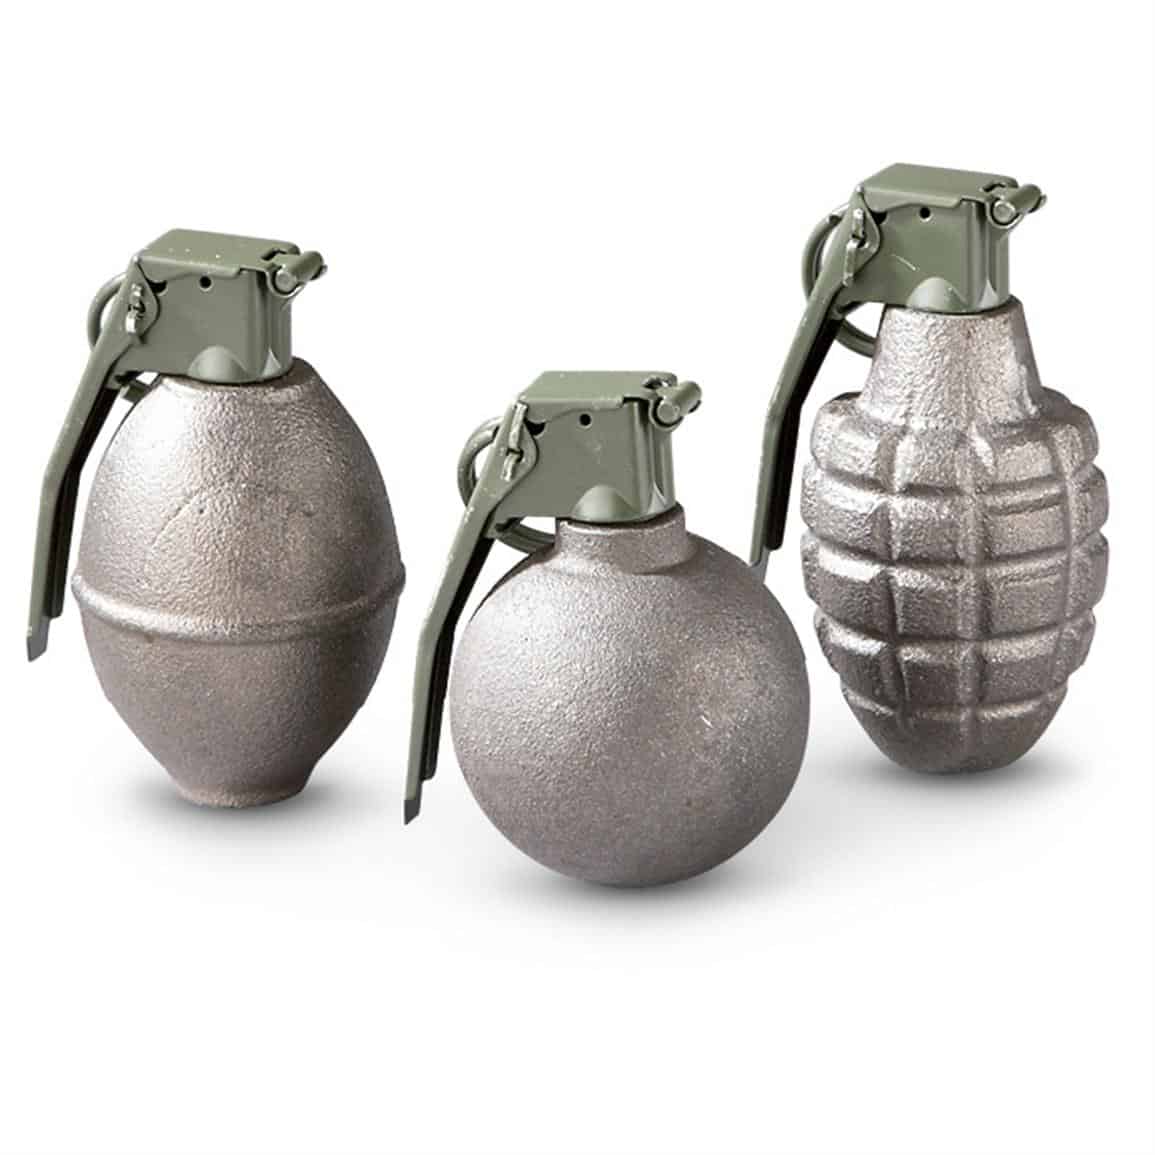 ED Byo Bomb Latest: Pumula ‘Grenade throwers’ in court, Unlikely names revealed